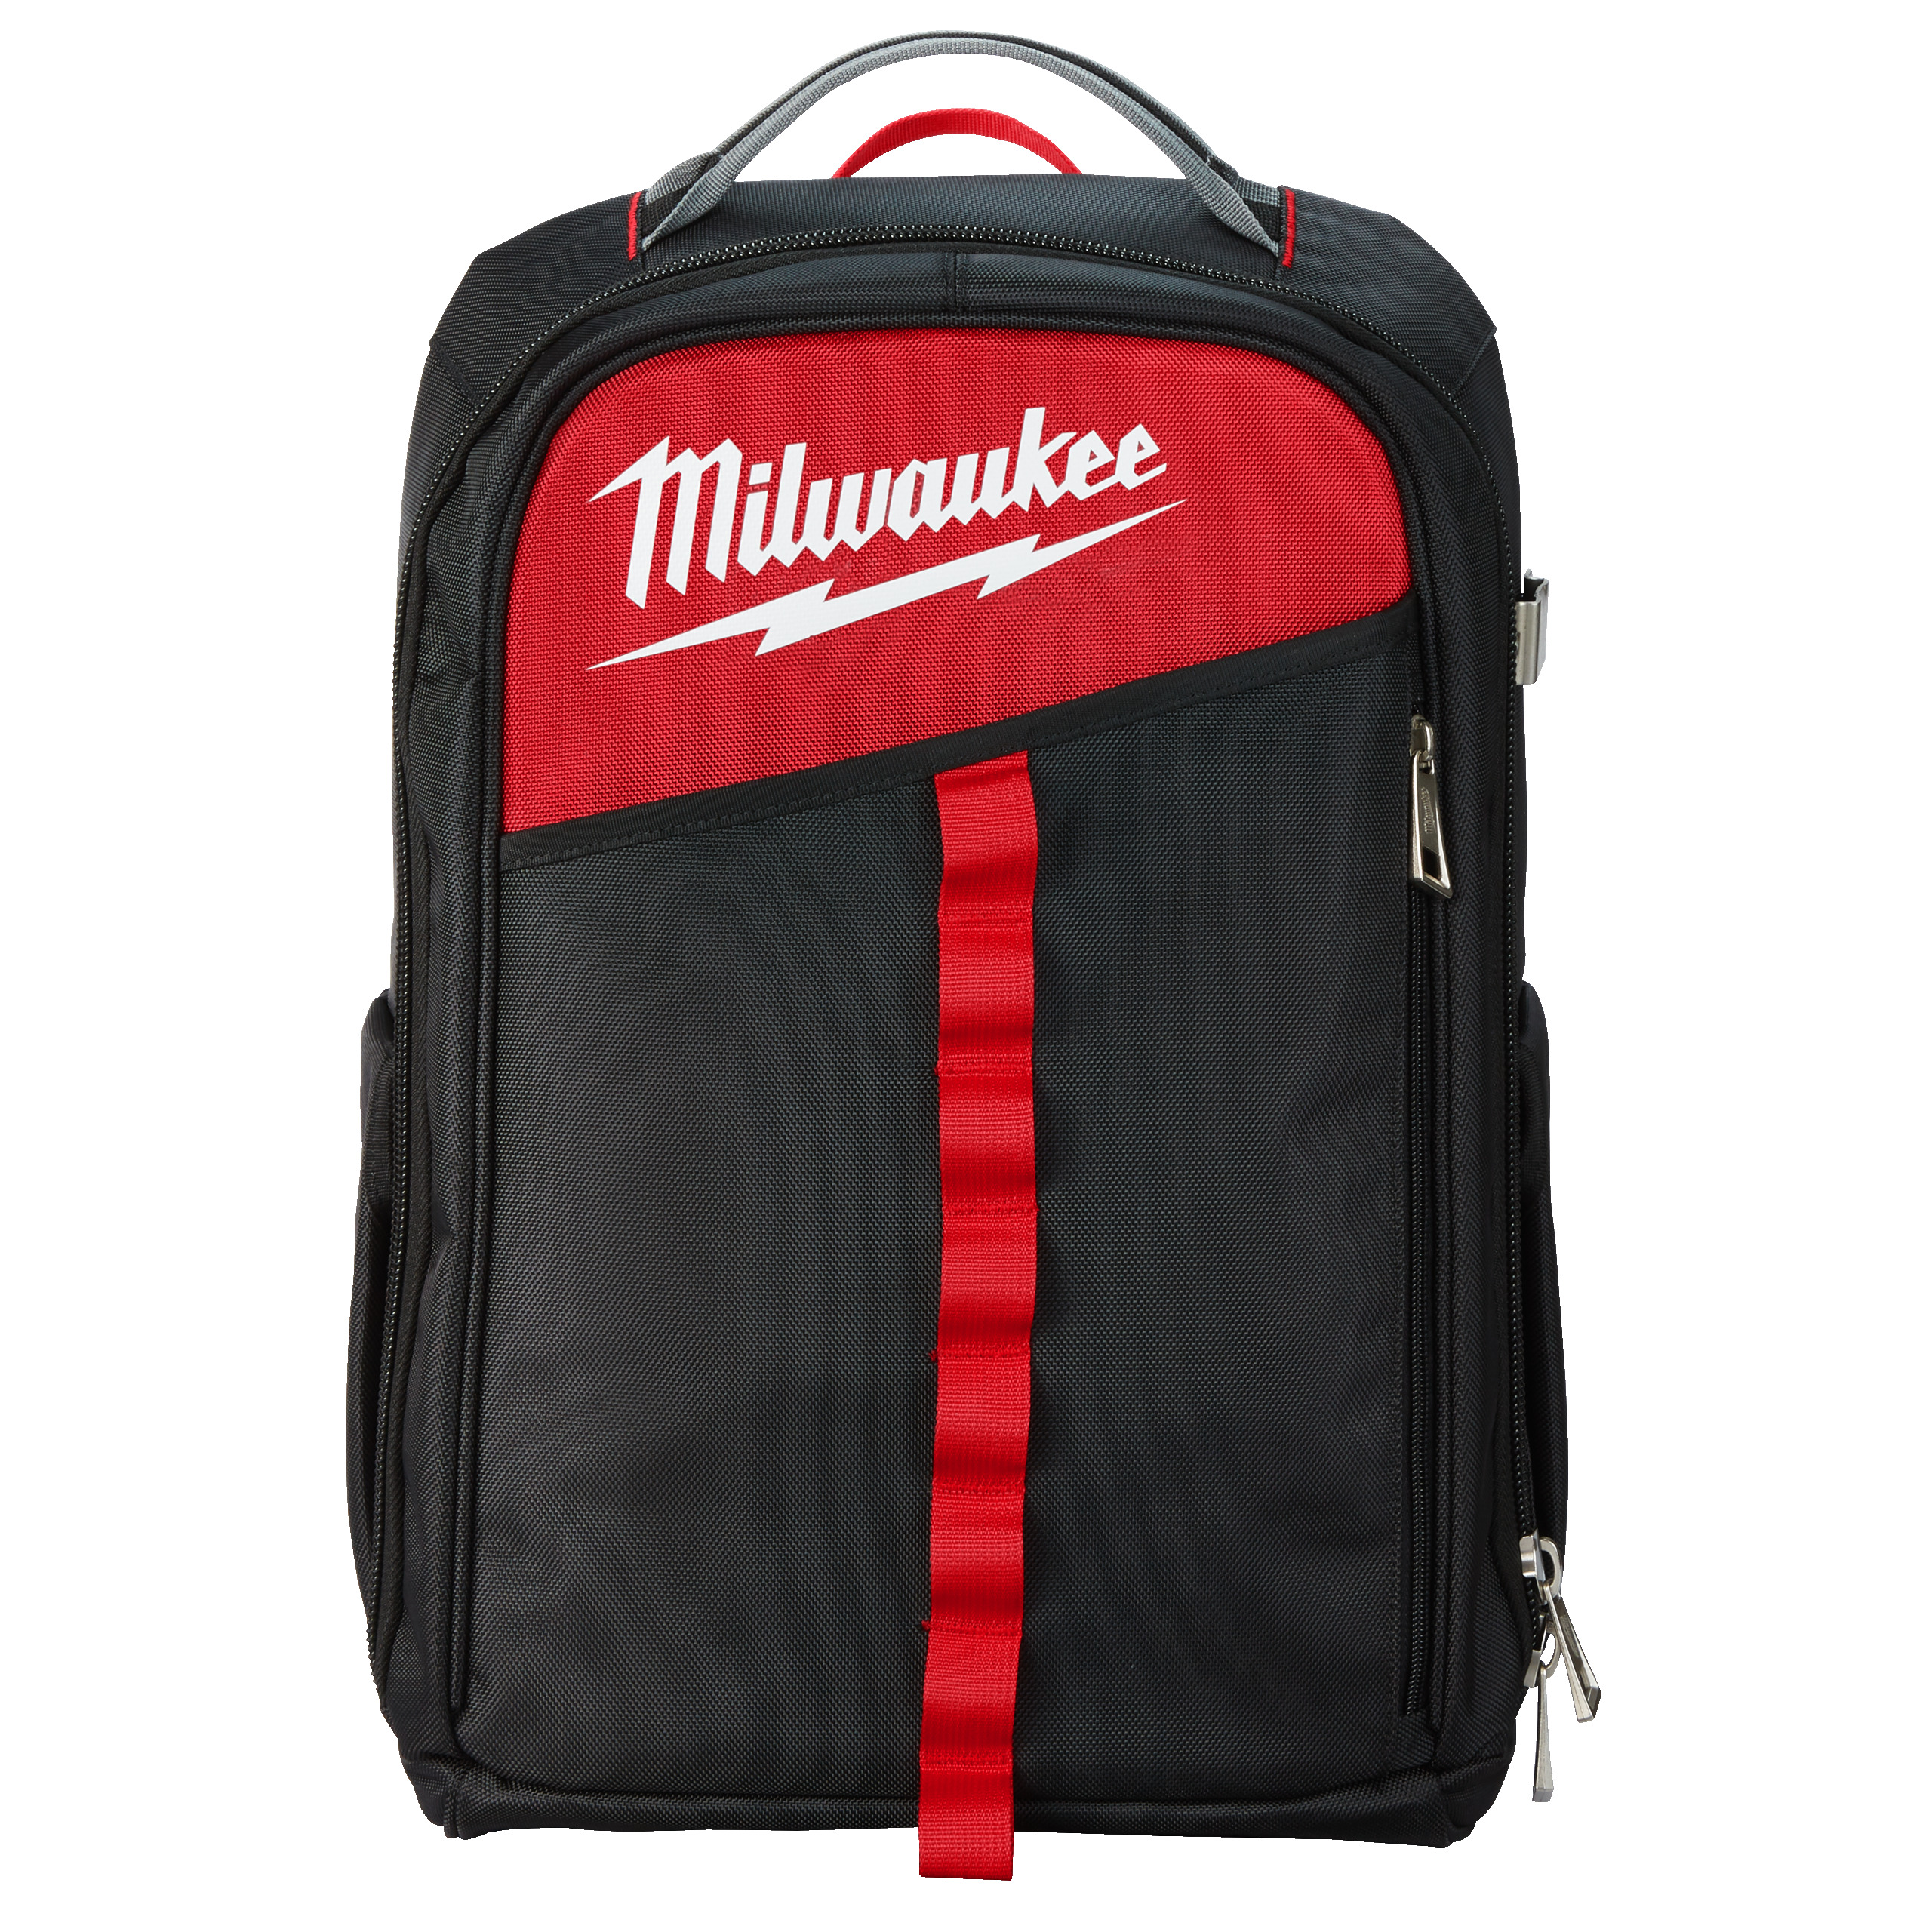 Milwaukee Low Profile Backpack - 1pc 4932464834